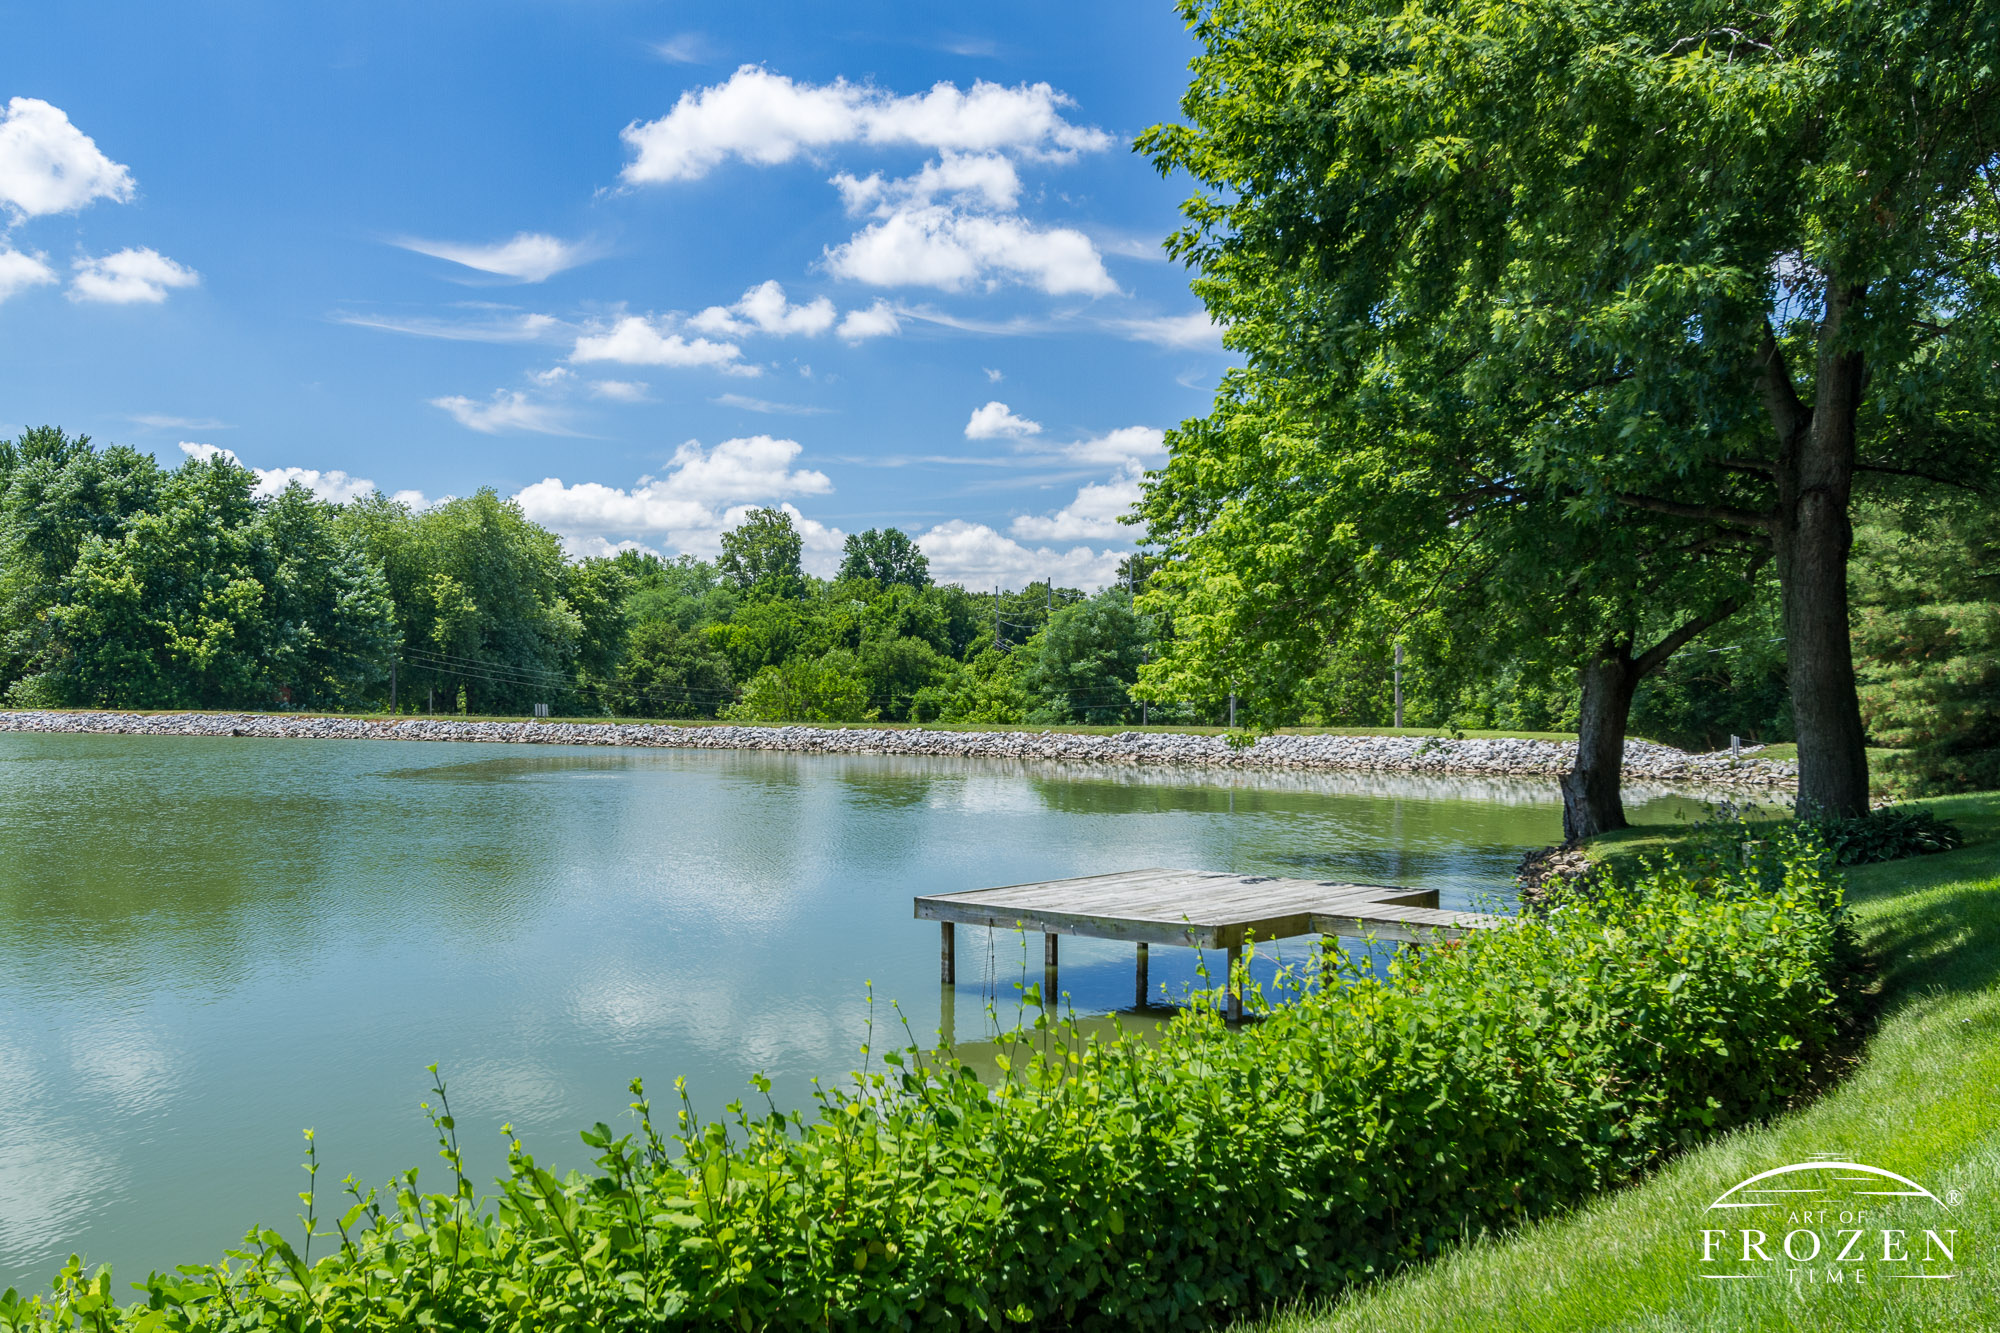 A view of a small dock extending into a pond which is surrounded by lush trees as puffy clouds float through the Illinois sky.